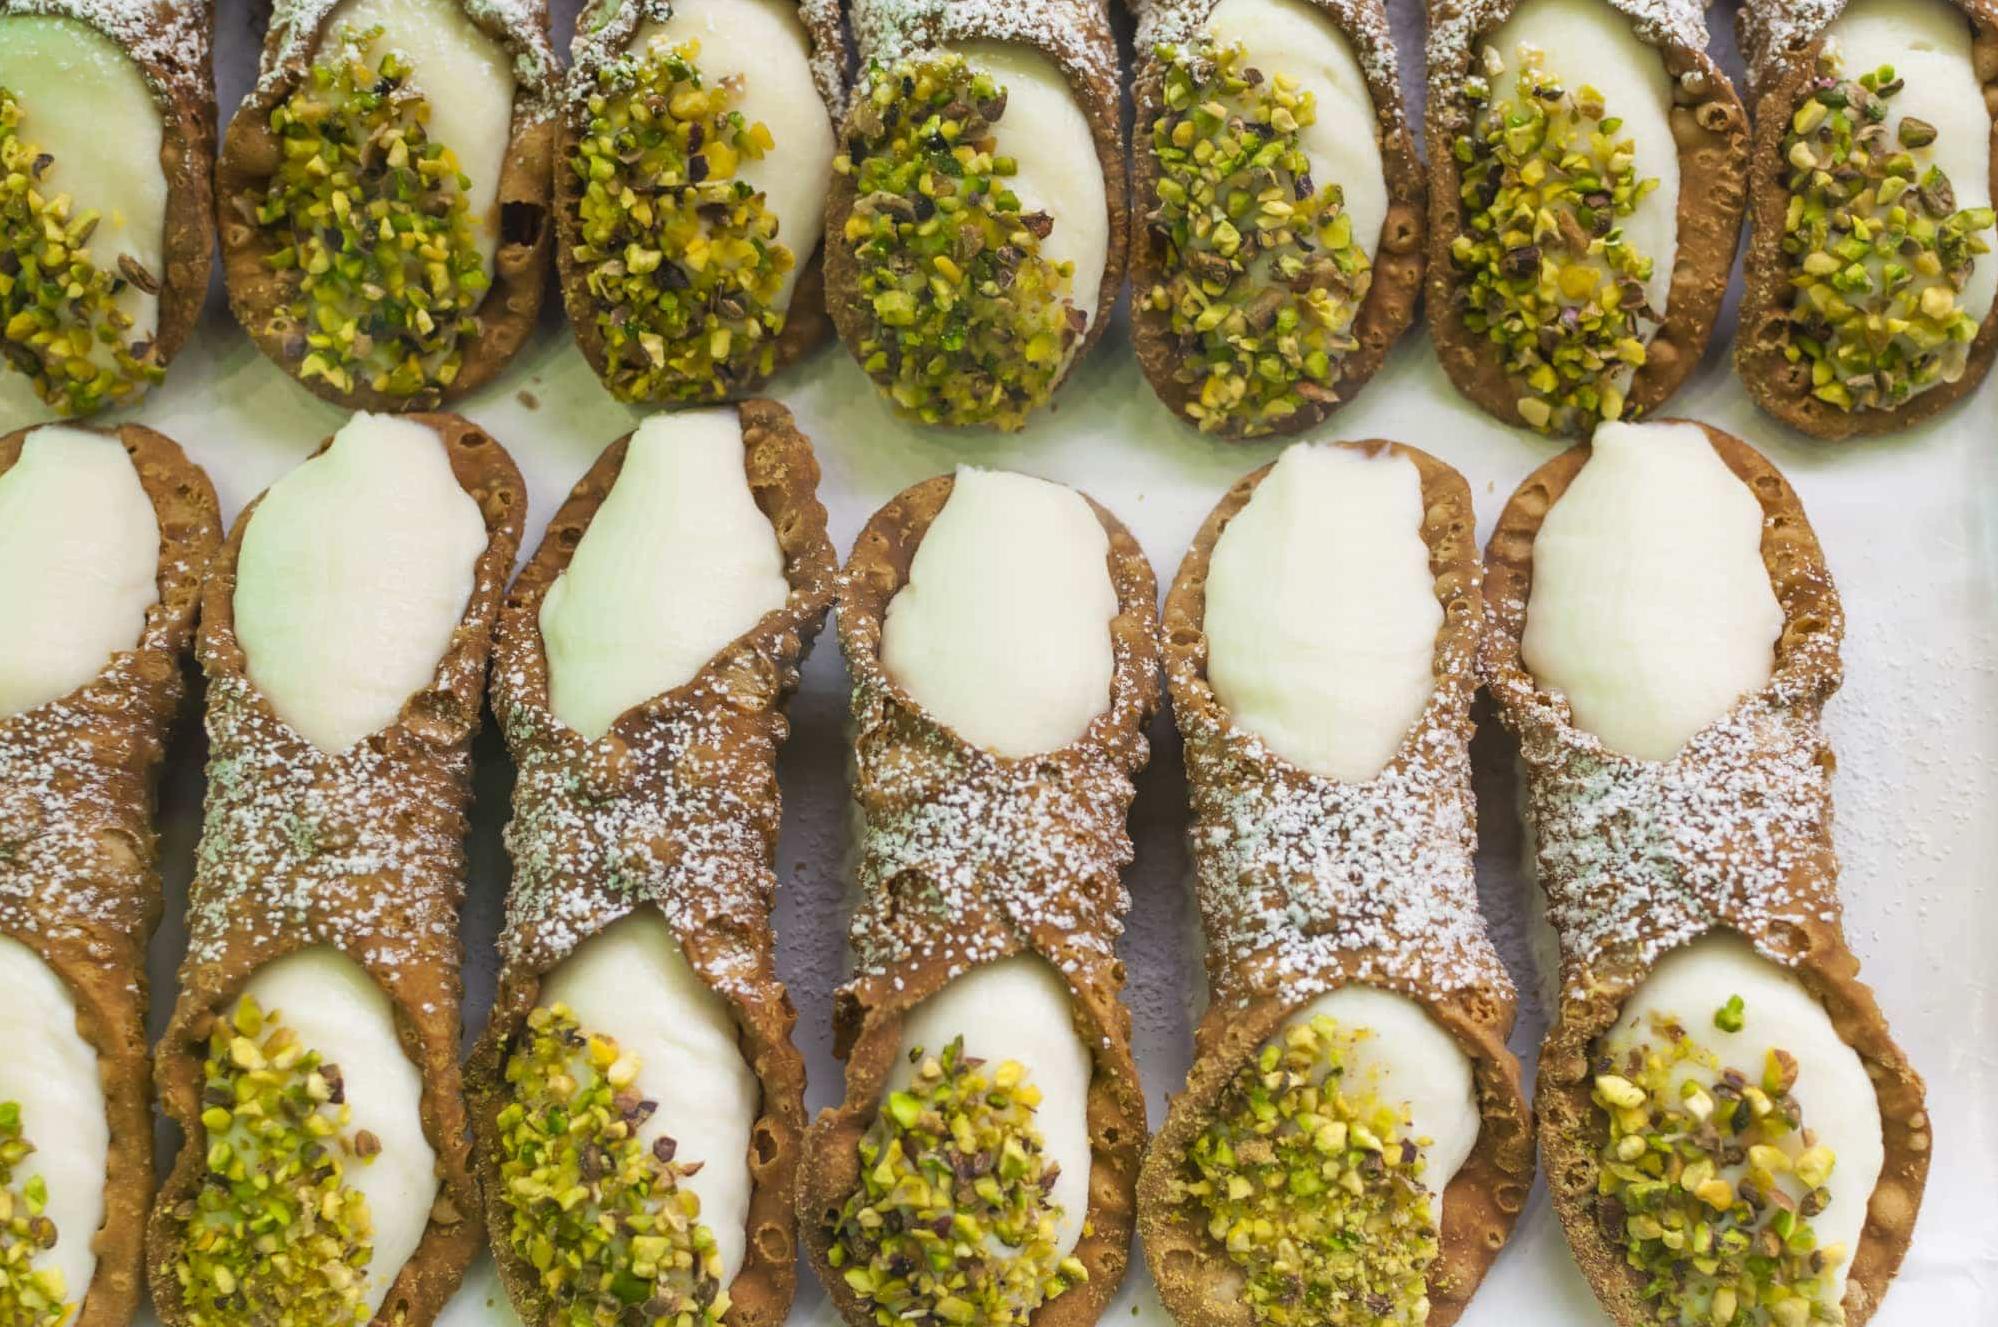  Heavenly combination of pumpkin and pistachios in these crispy shells